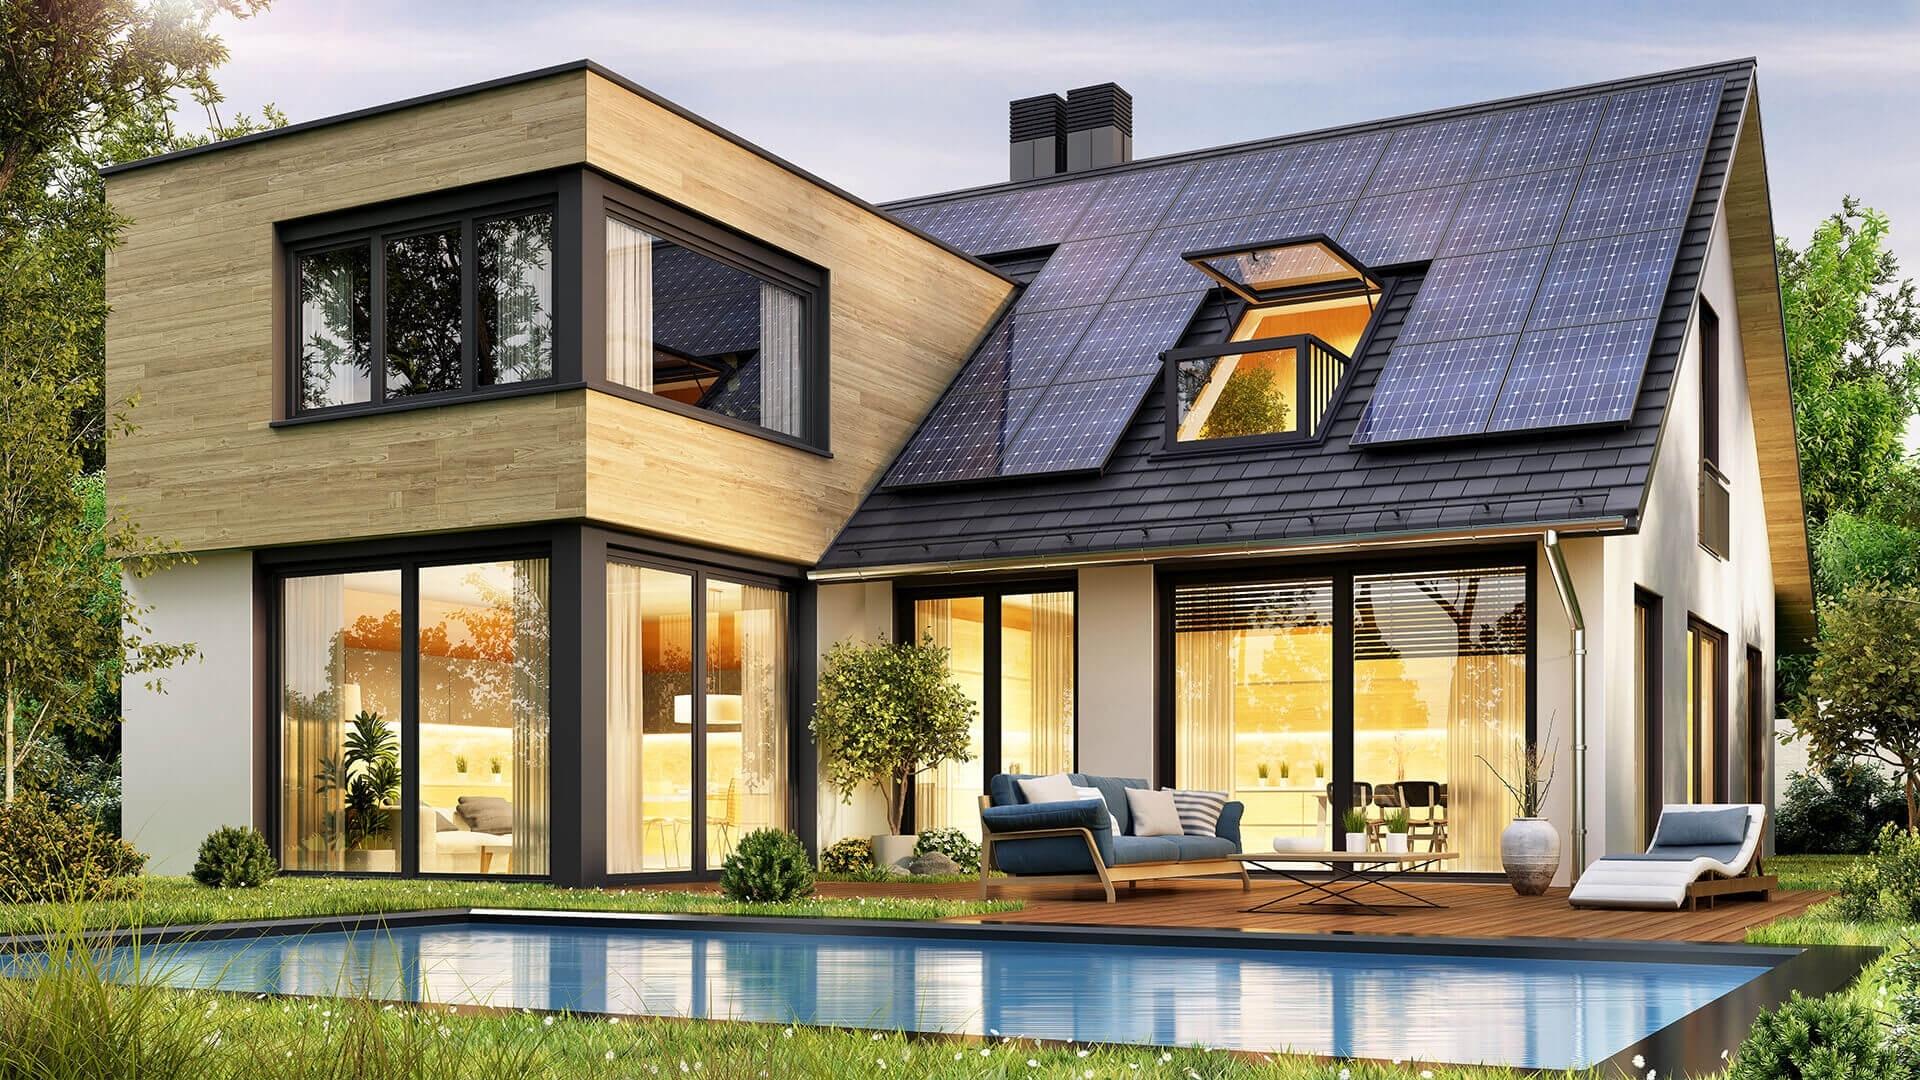 6 Sustainable Swaps for an Eco-Conscious Home